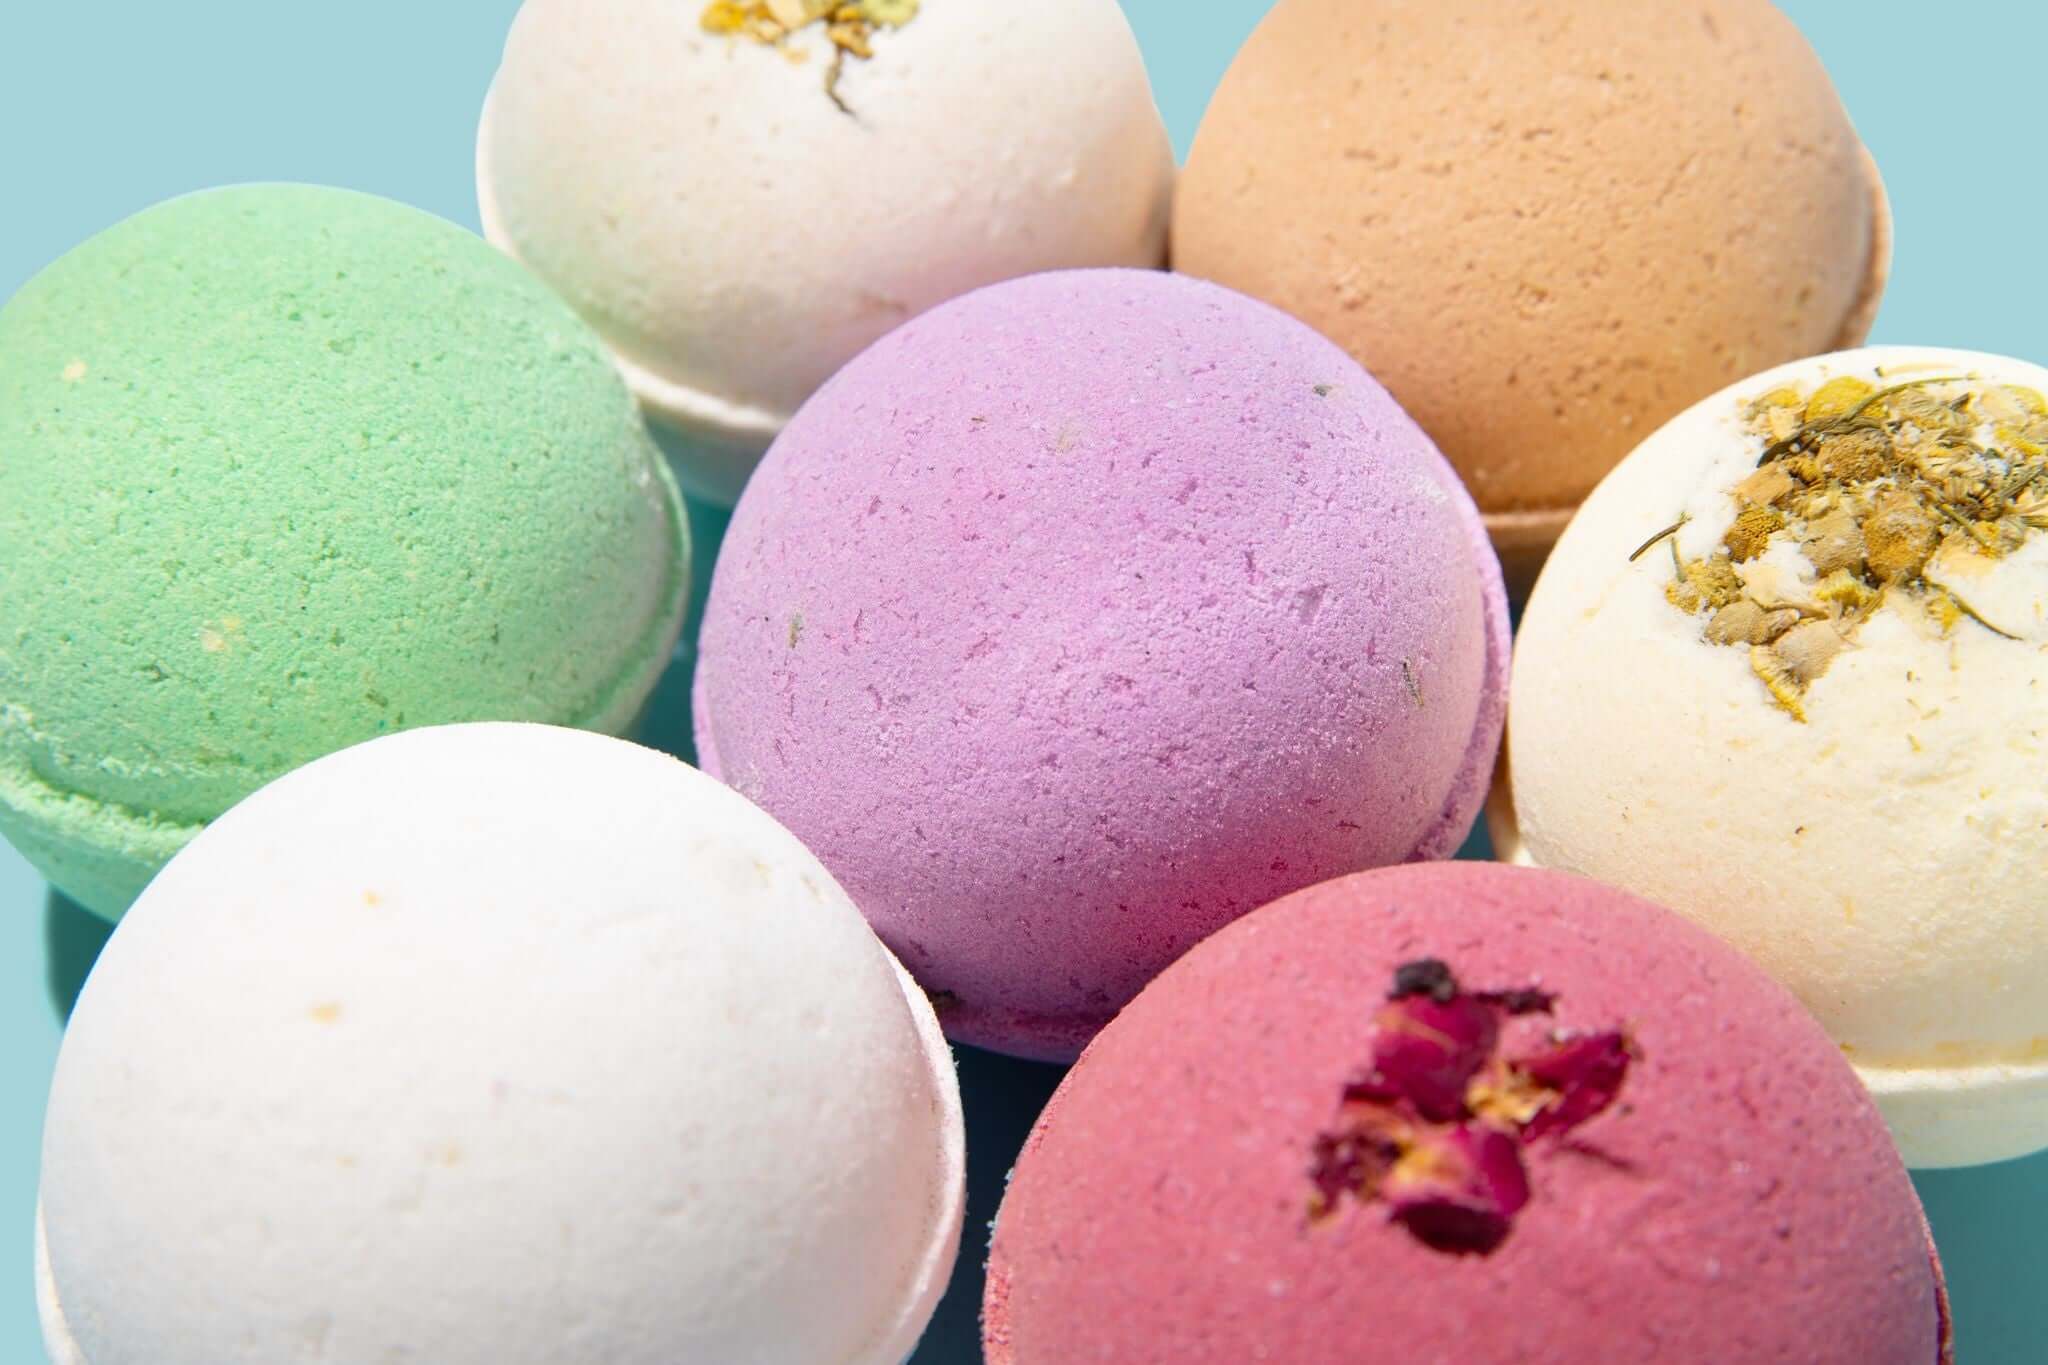 Tub Therapy | The Pros and Cons of a CBD Bath Bomb